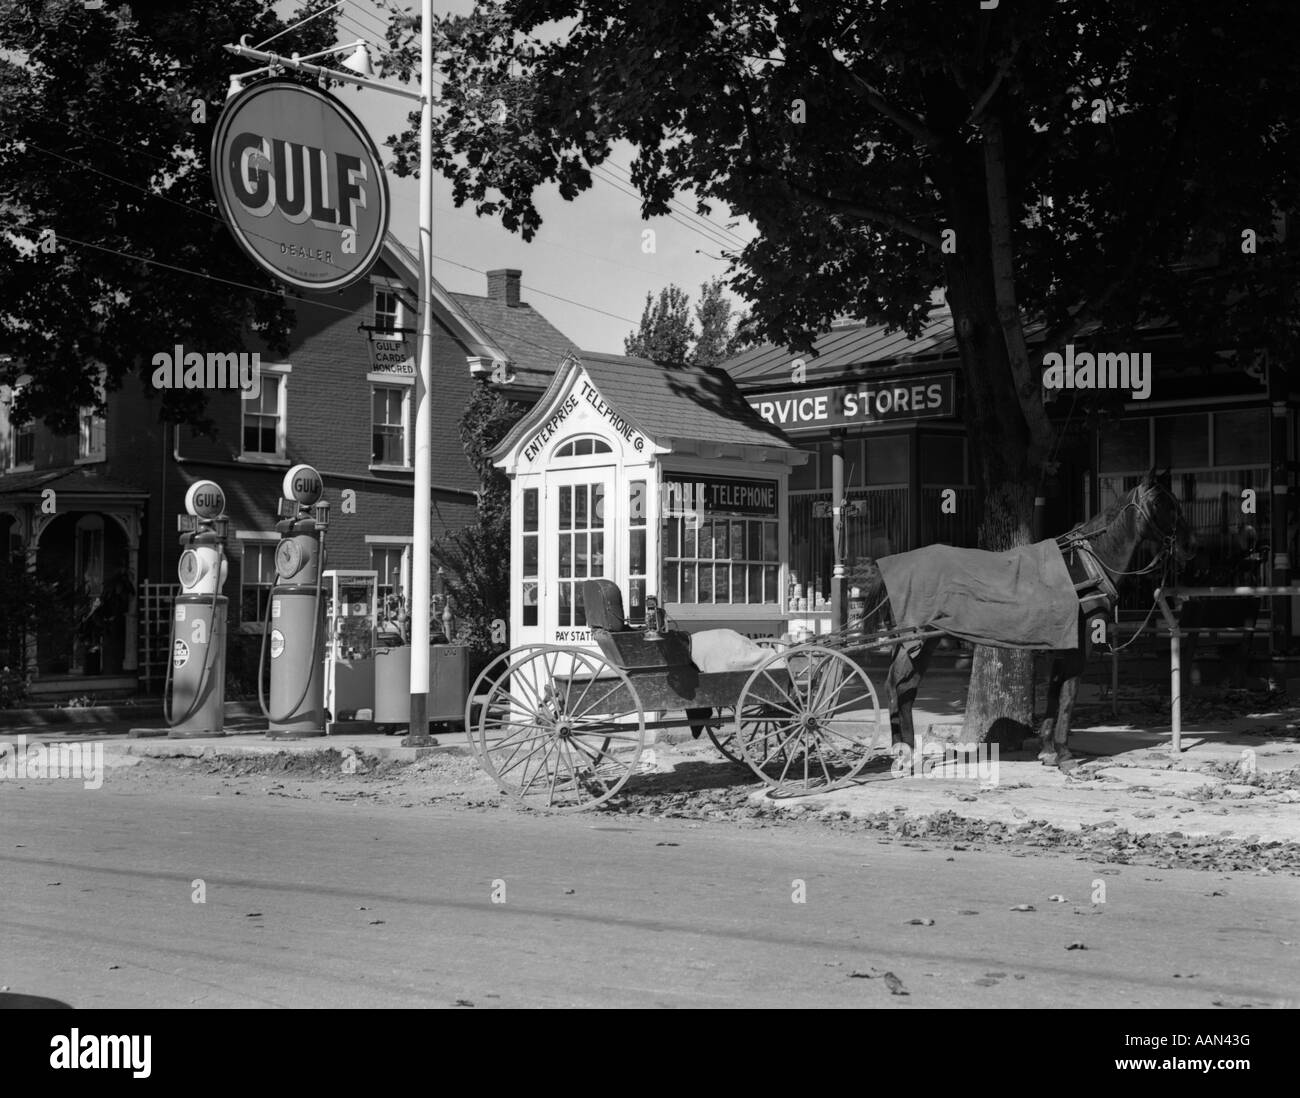 1930s HORSE & EMPTY BUGGY TIED TO POLE OUTSIDE OF GULF SERVICE STATION NEXT TO FANCY WOODEN PHONE BOOTH WITH SHINGLED ROOF Stock Photo